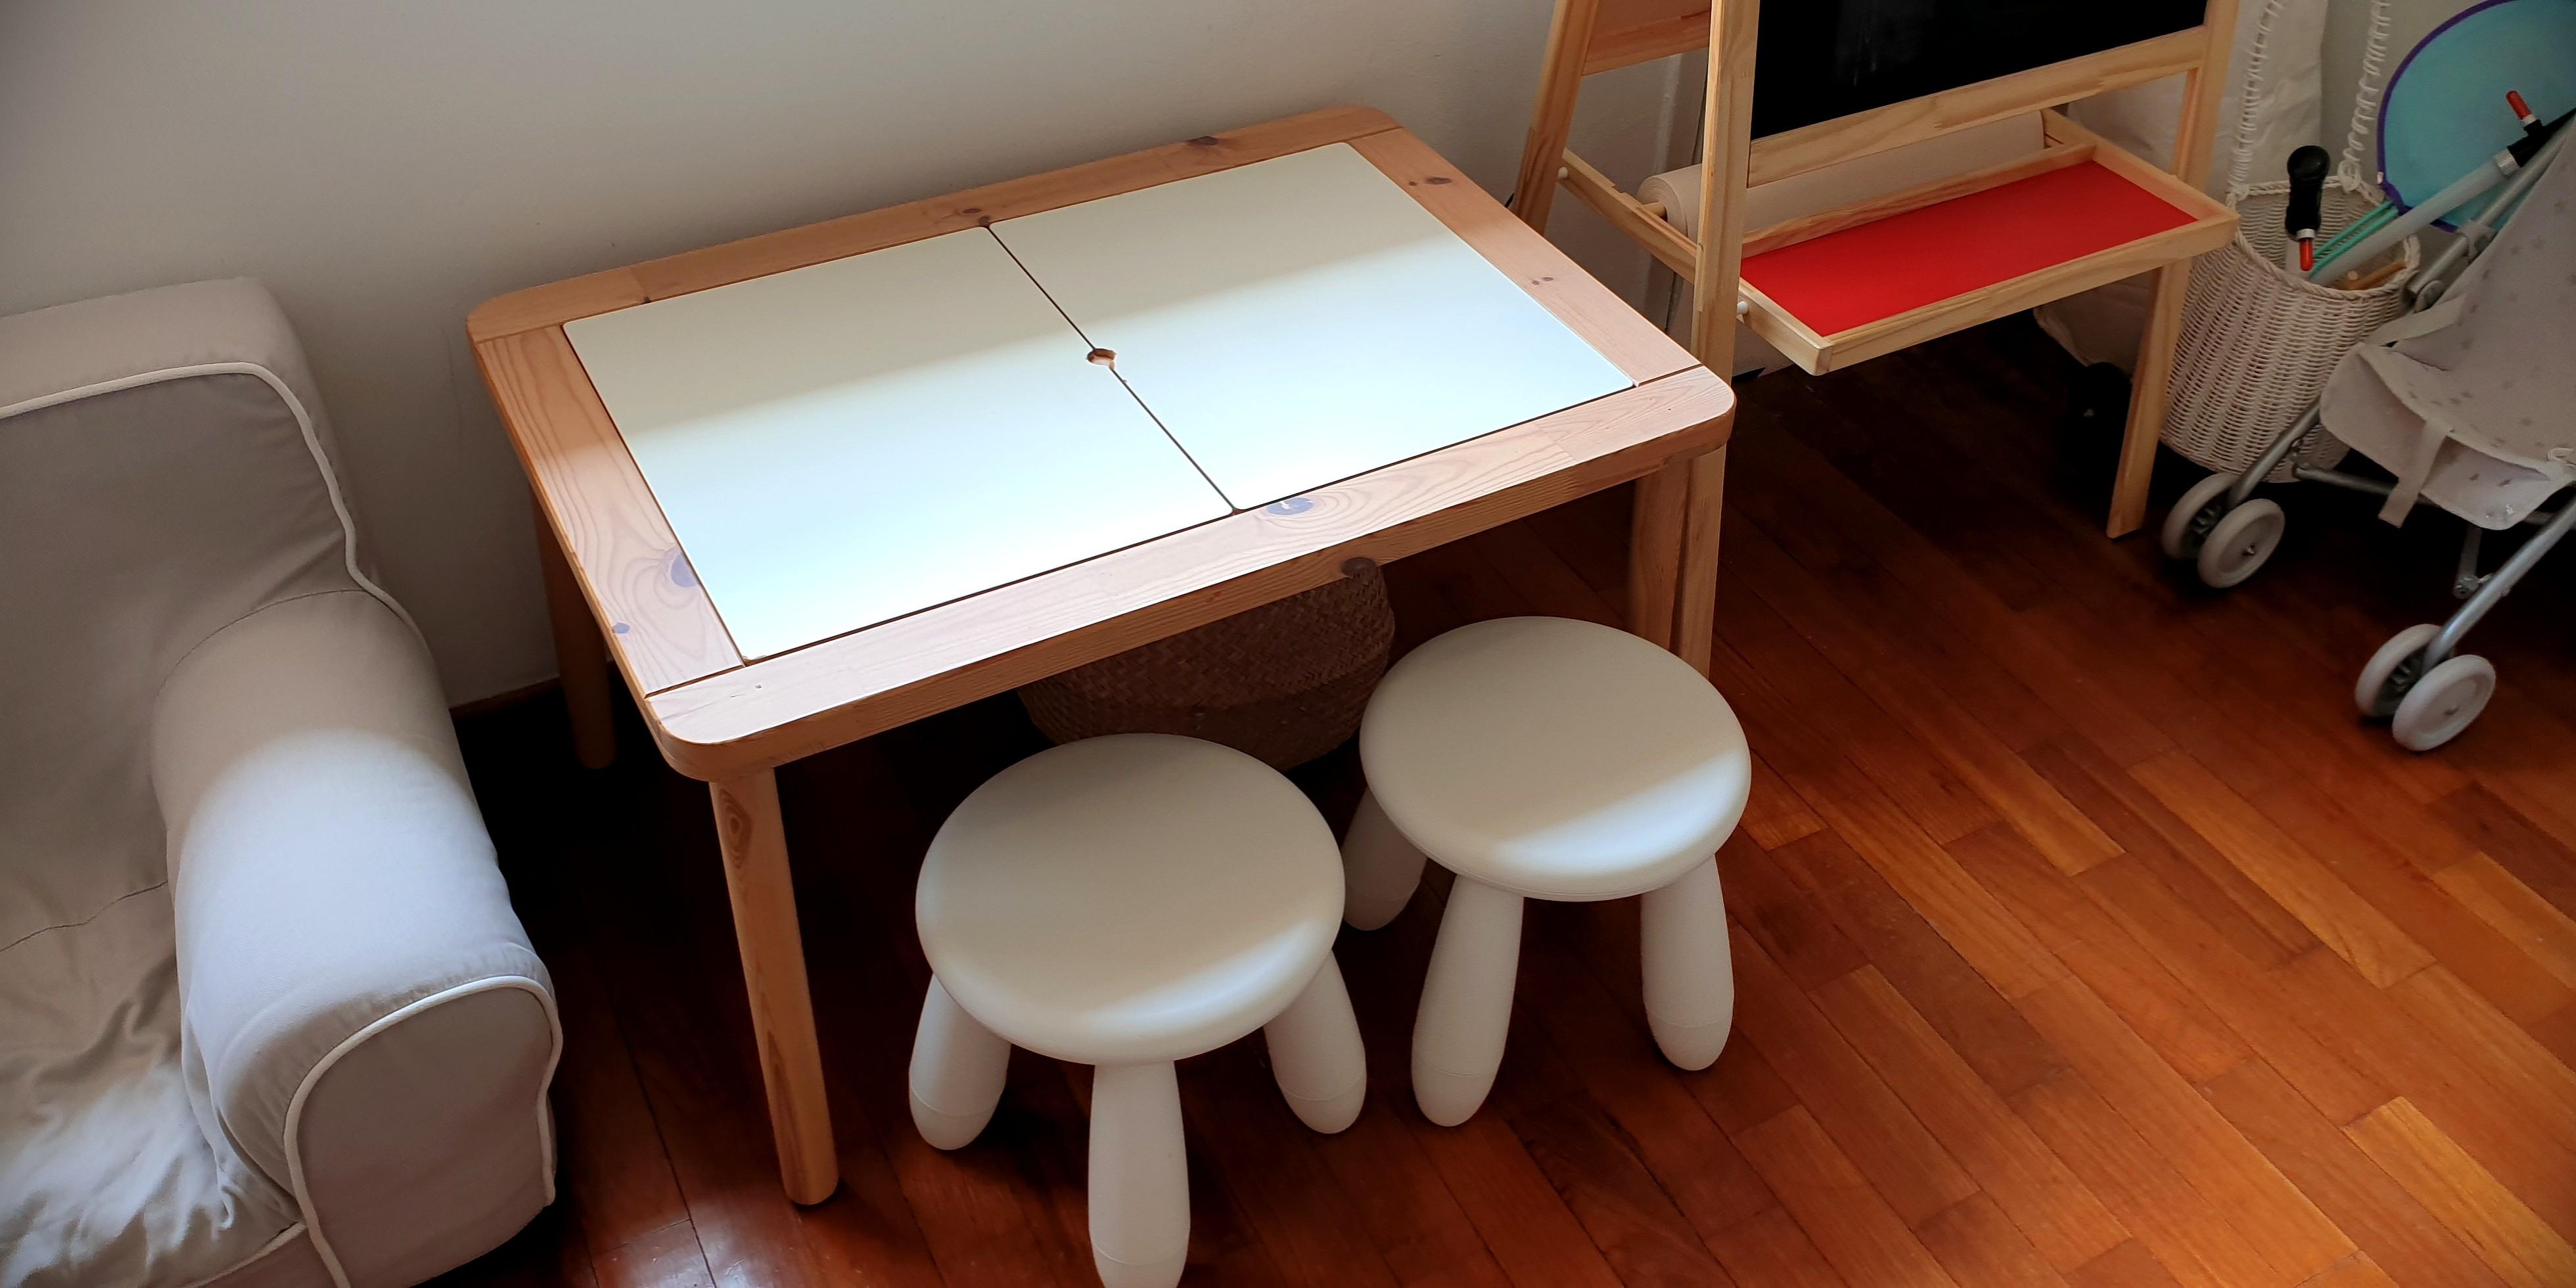 children's tables and chairs for sale